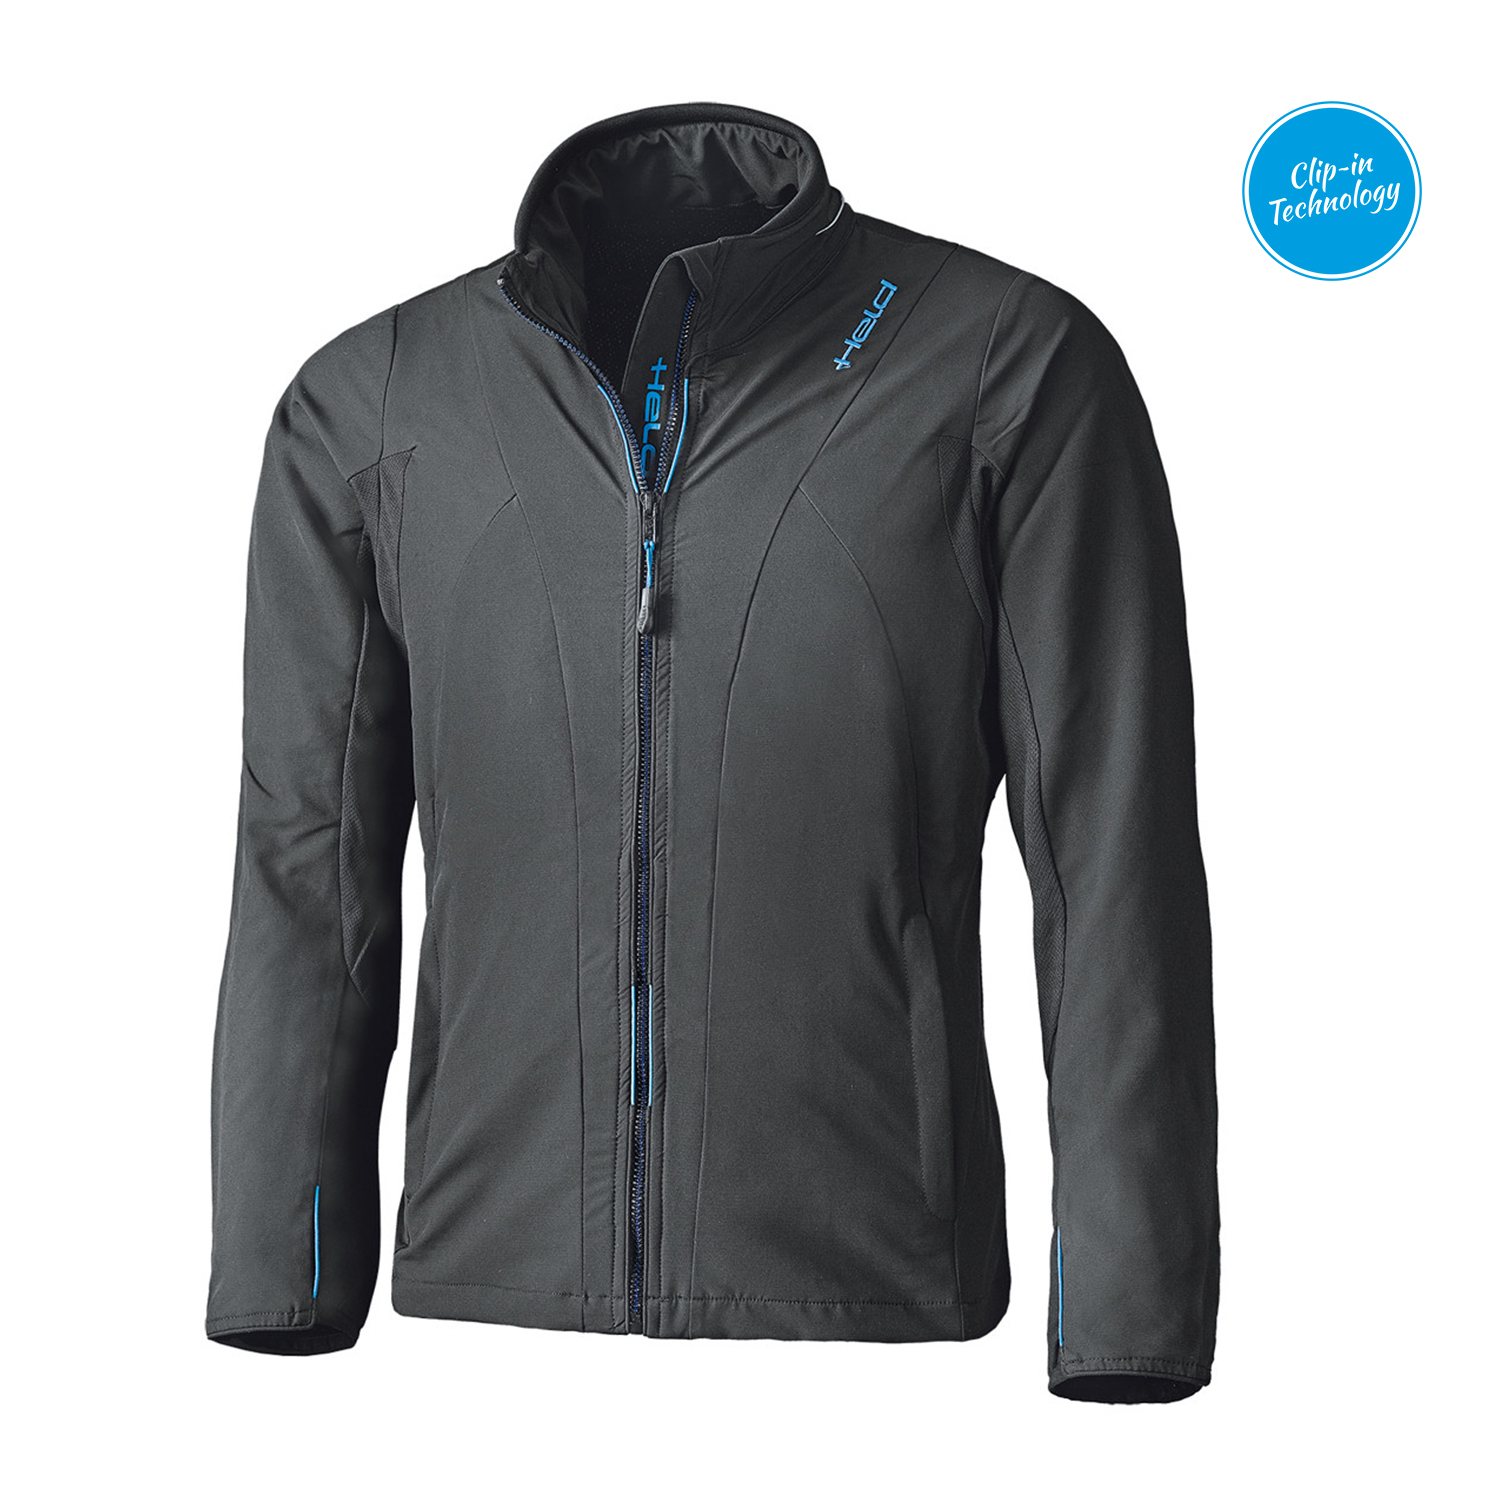 Held Clip-in Windblocker Top Jacket Black - Available in Various Sizes